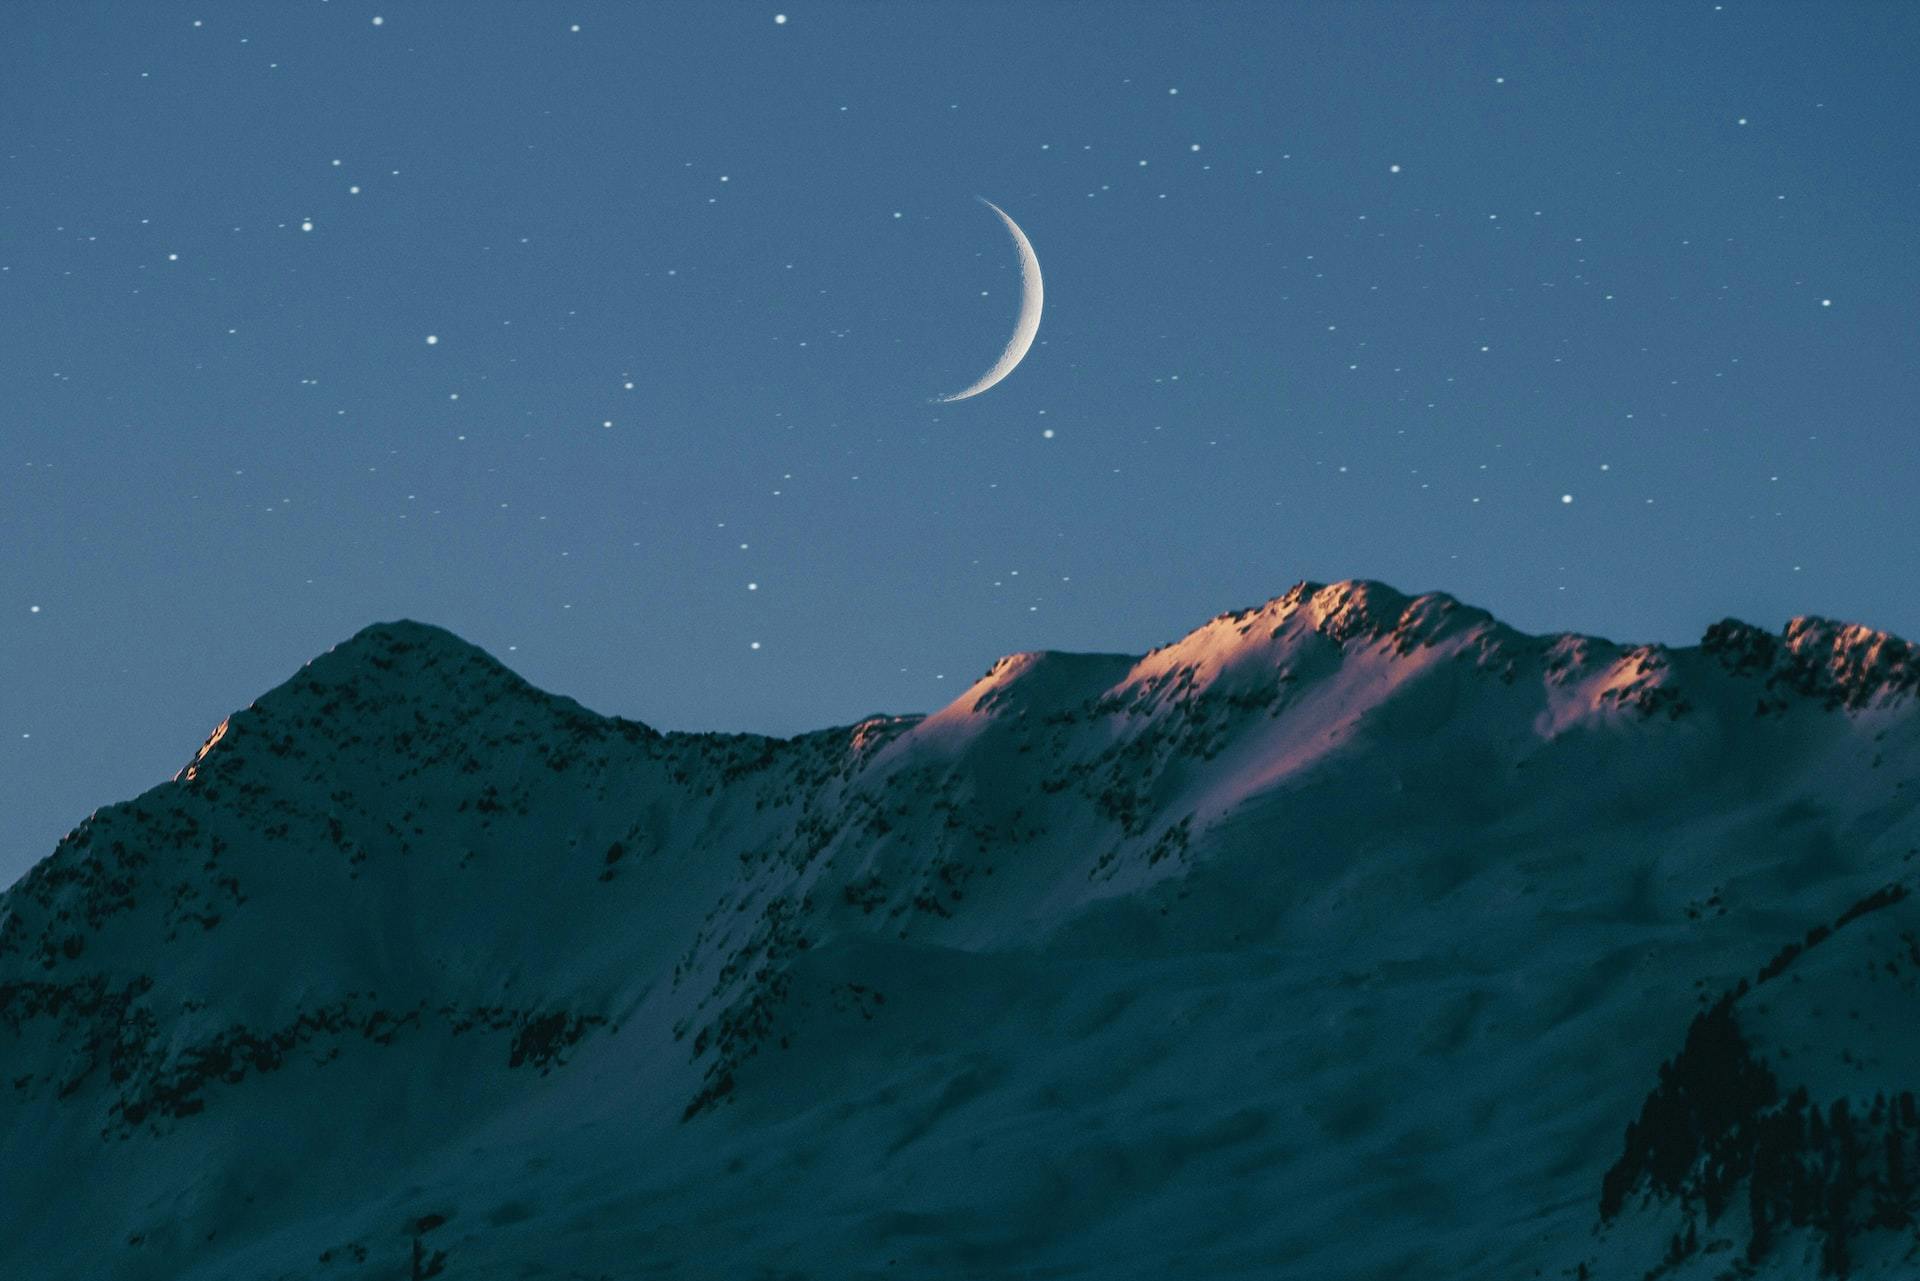 The night sky with stars and a crescent moon visible above snowy mountains whose peaks are just illuminated by the setting sun